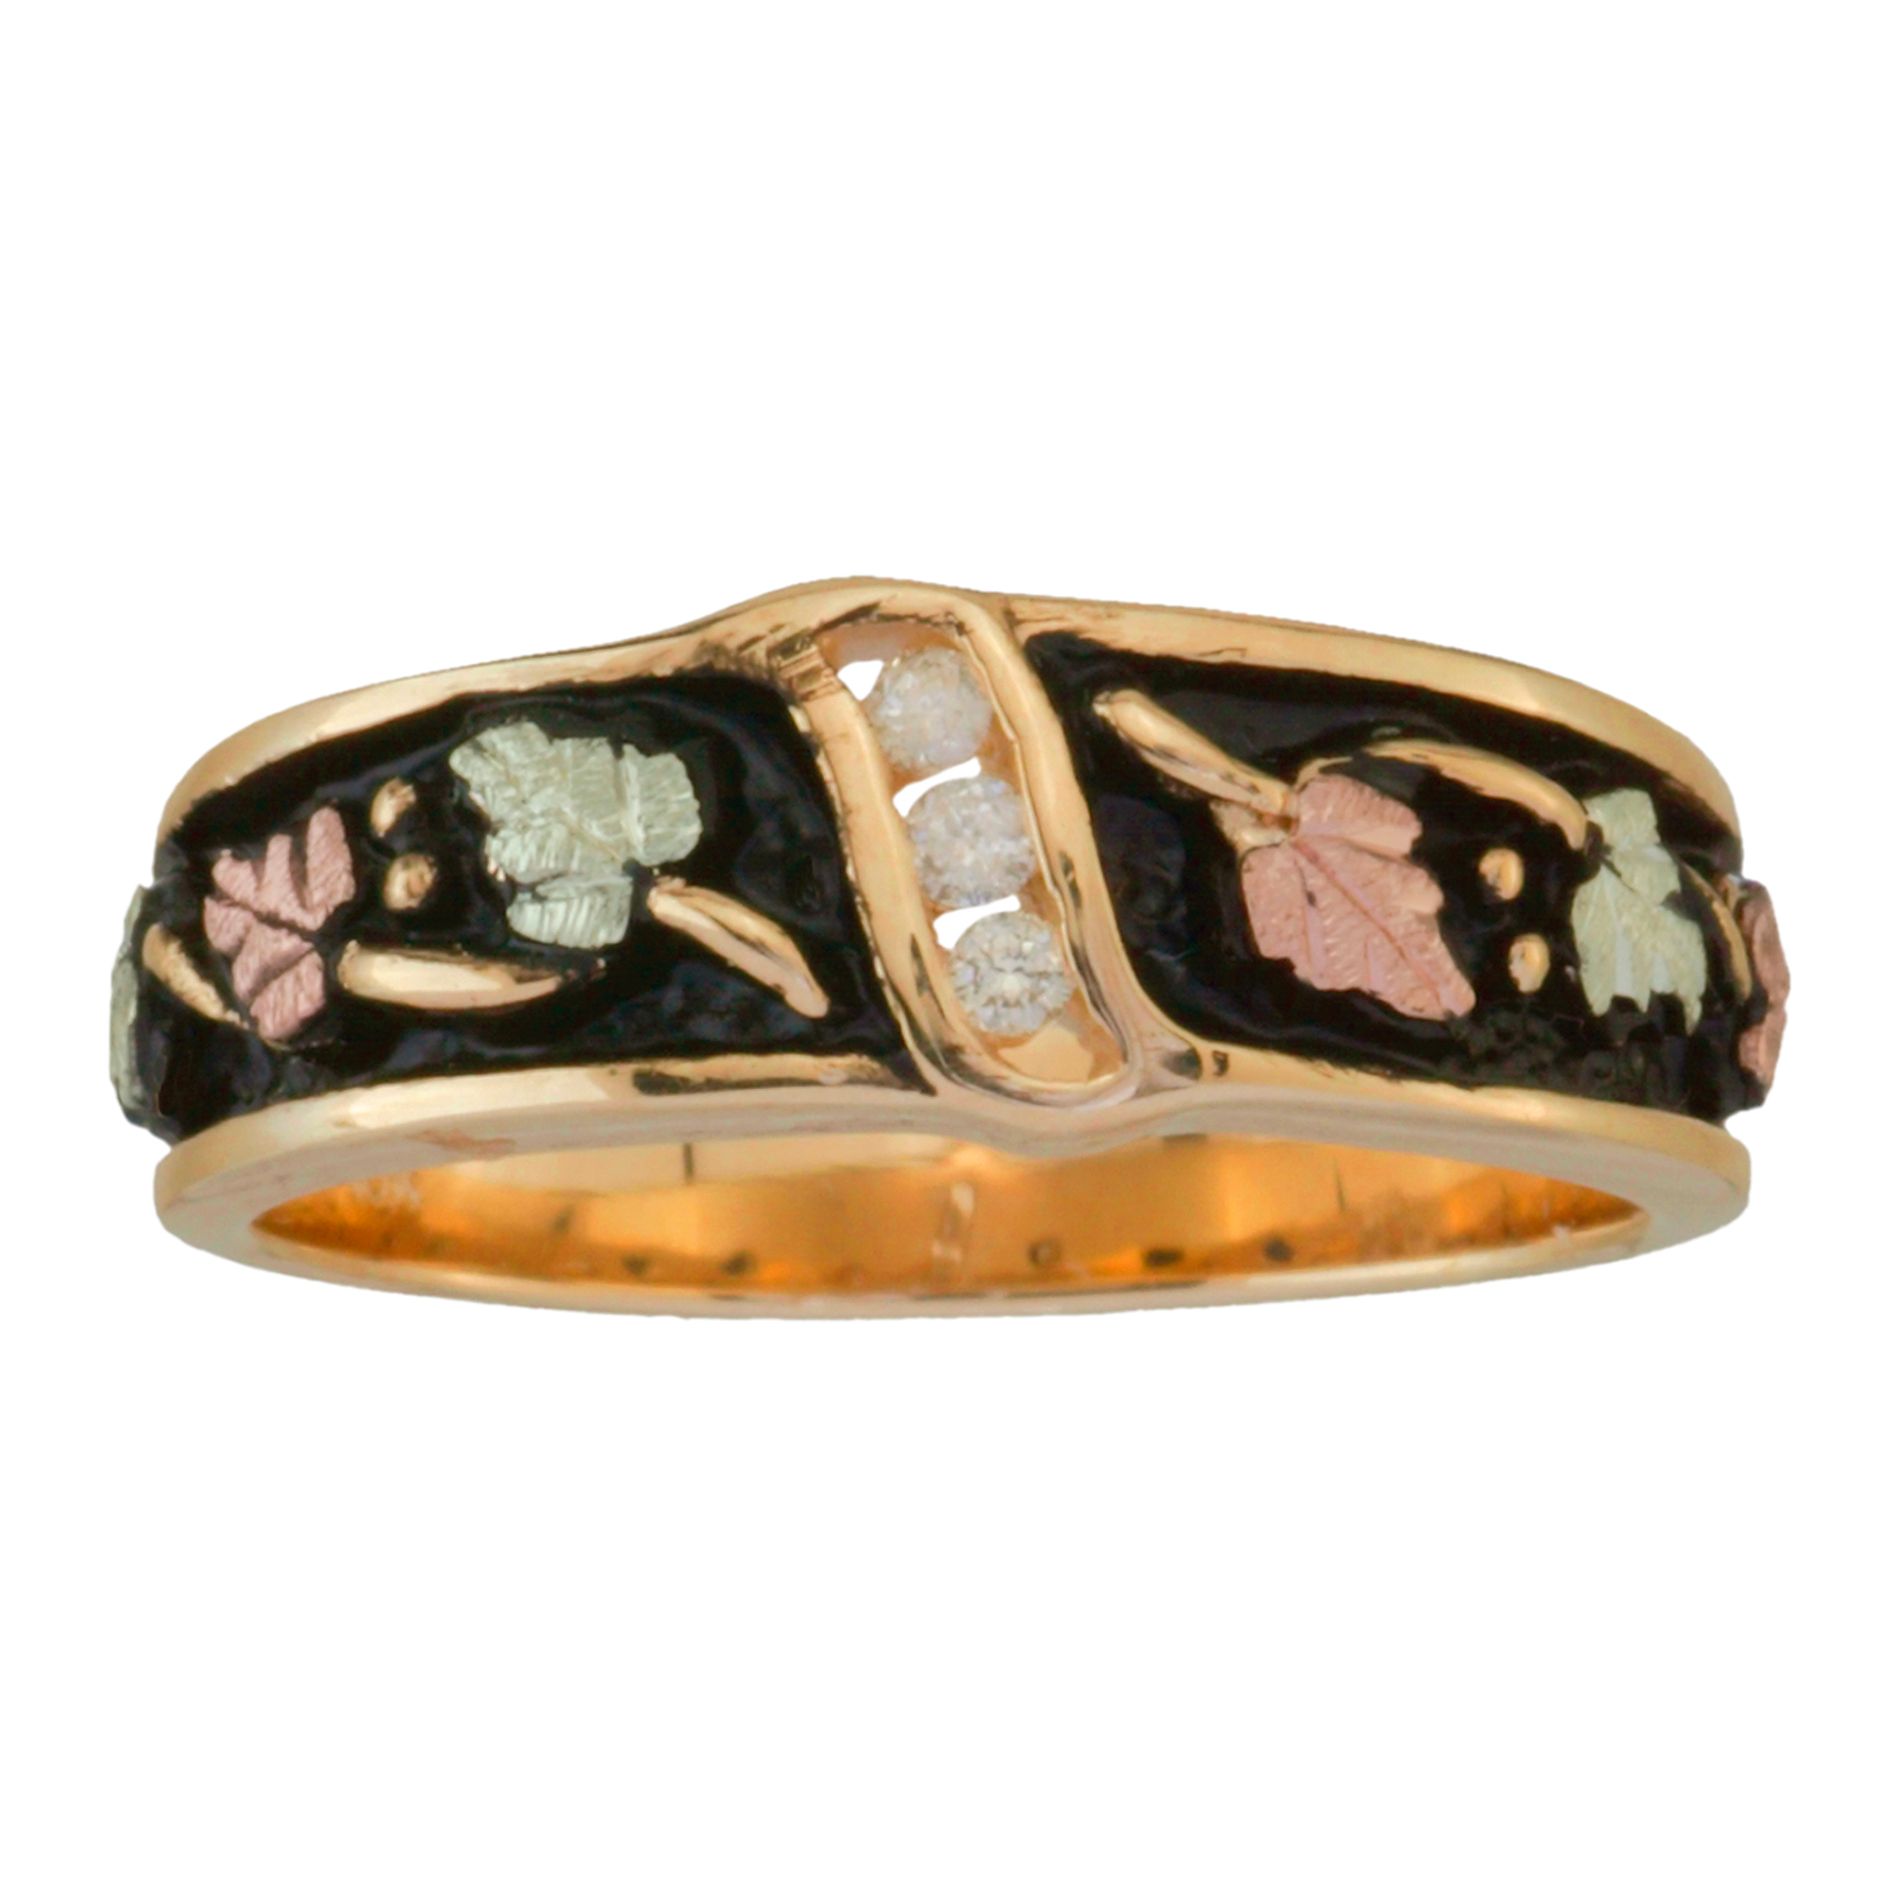 Tricolor 10K Gold Ladies' Antiqued Diamond Accent Band Ring